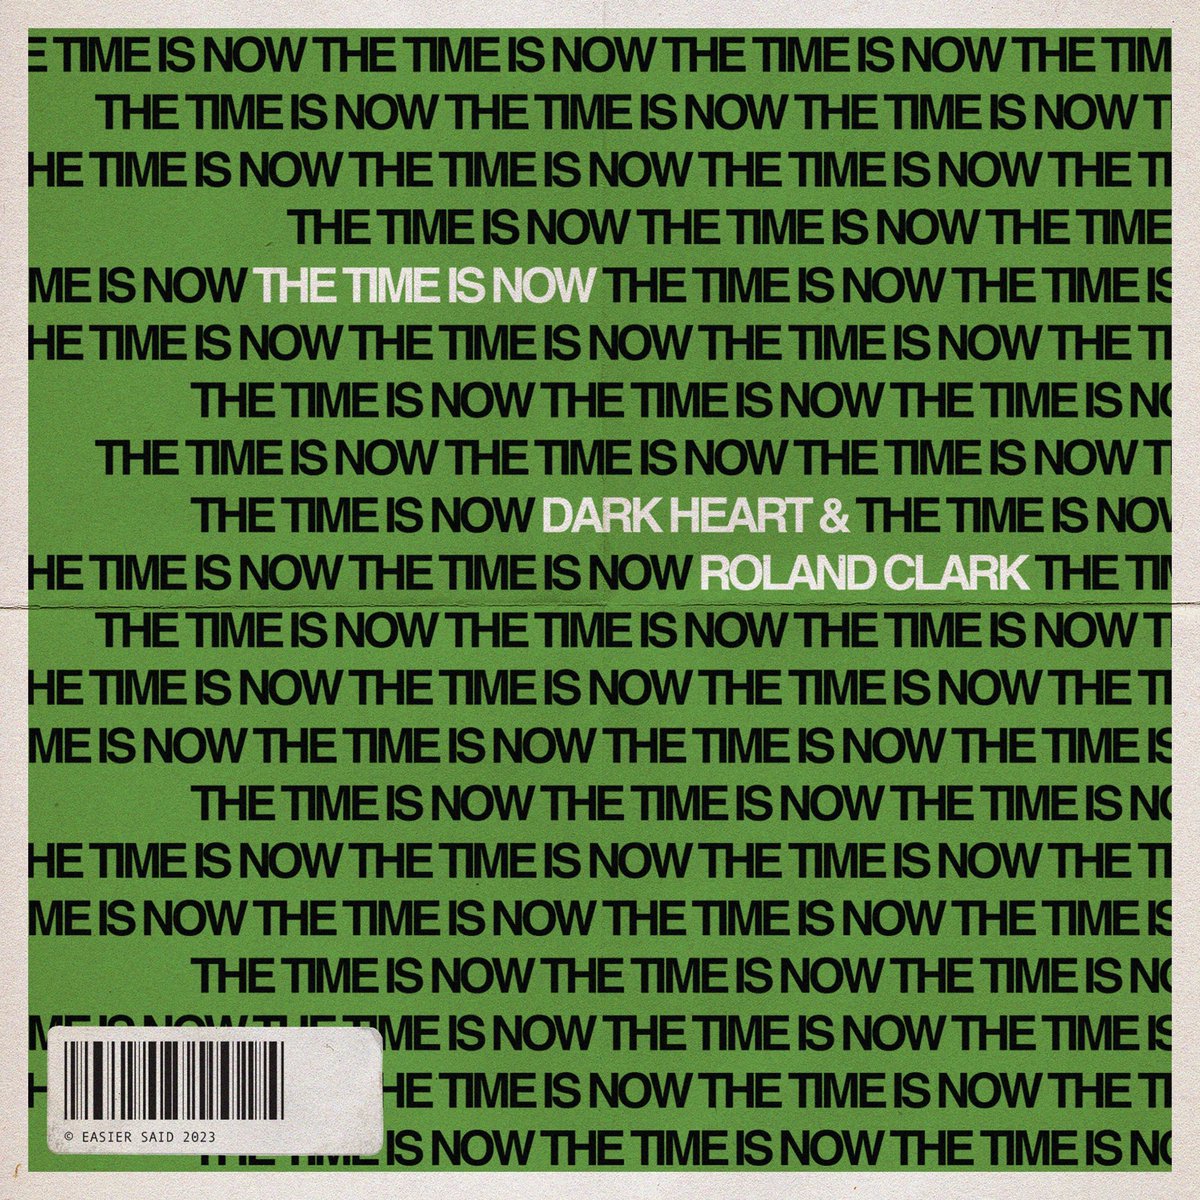 THE TIME IS NOW New Release from @dddarkheart & @rolandclark easiersaid.lnk.to/TheTimeIsNow